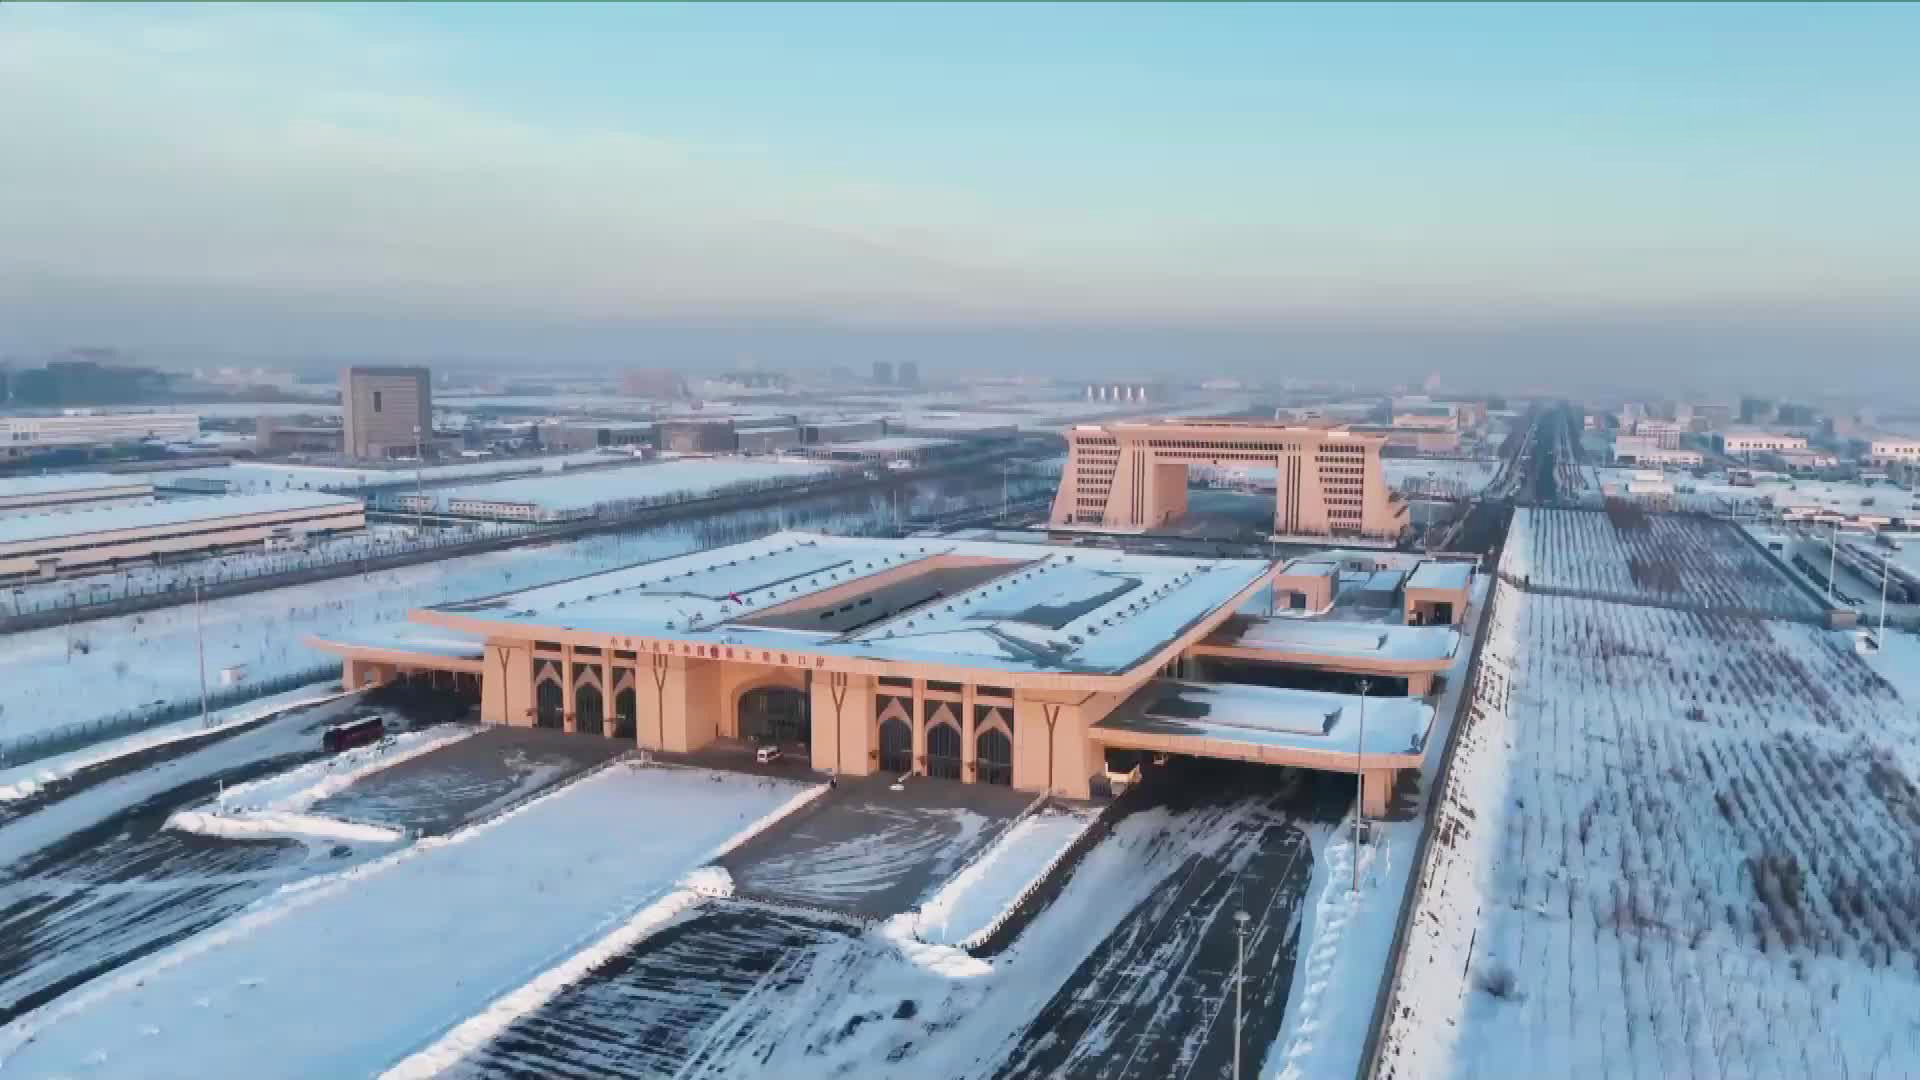 Live: Winter view of Khorgos in northwest China's Xinjiang – Ep. 2